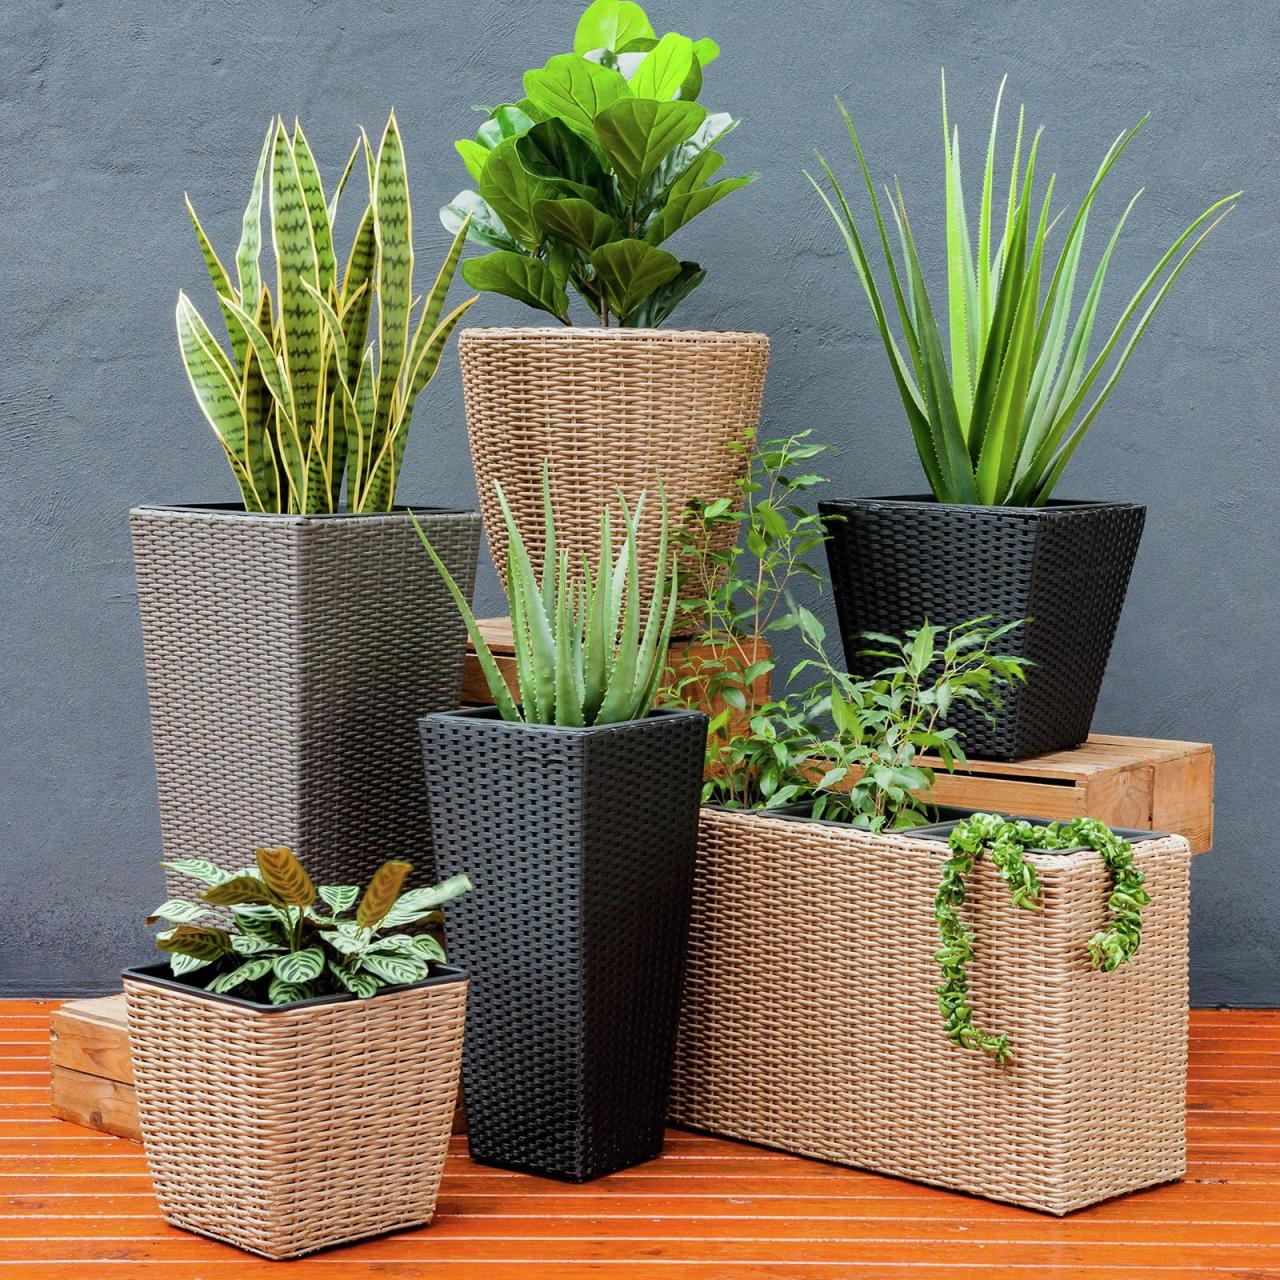 Hanging Plants Indoor | Bunnings Large Plant Pots: A Comprehensive Guide to Choosing, Planting, and Maintaining